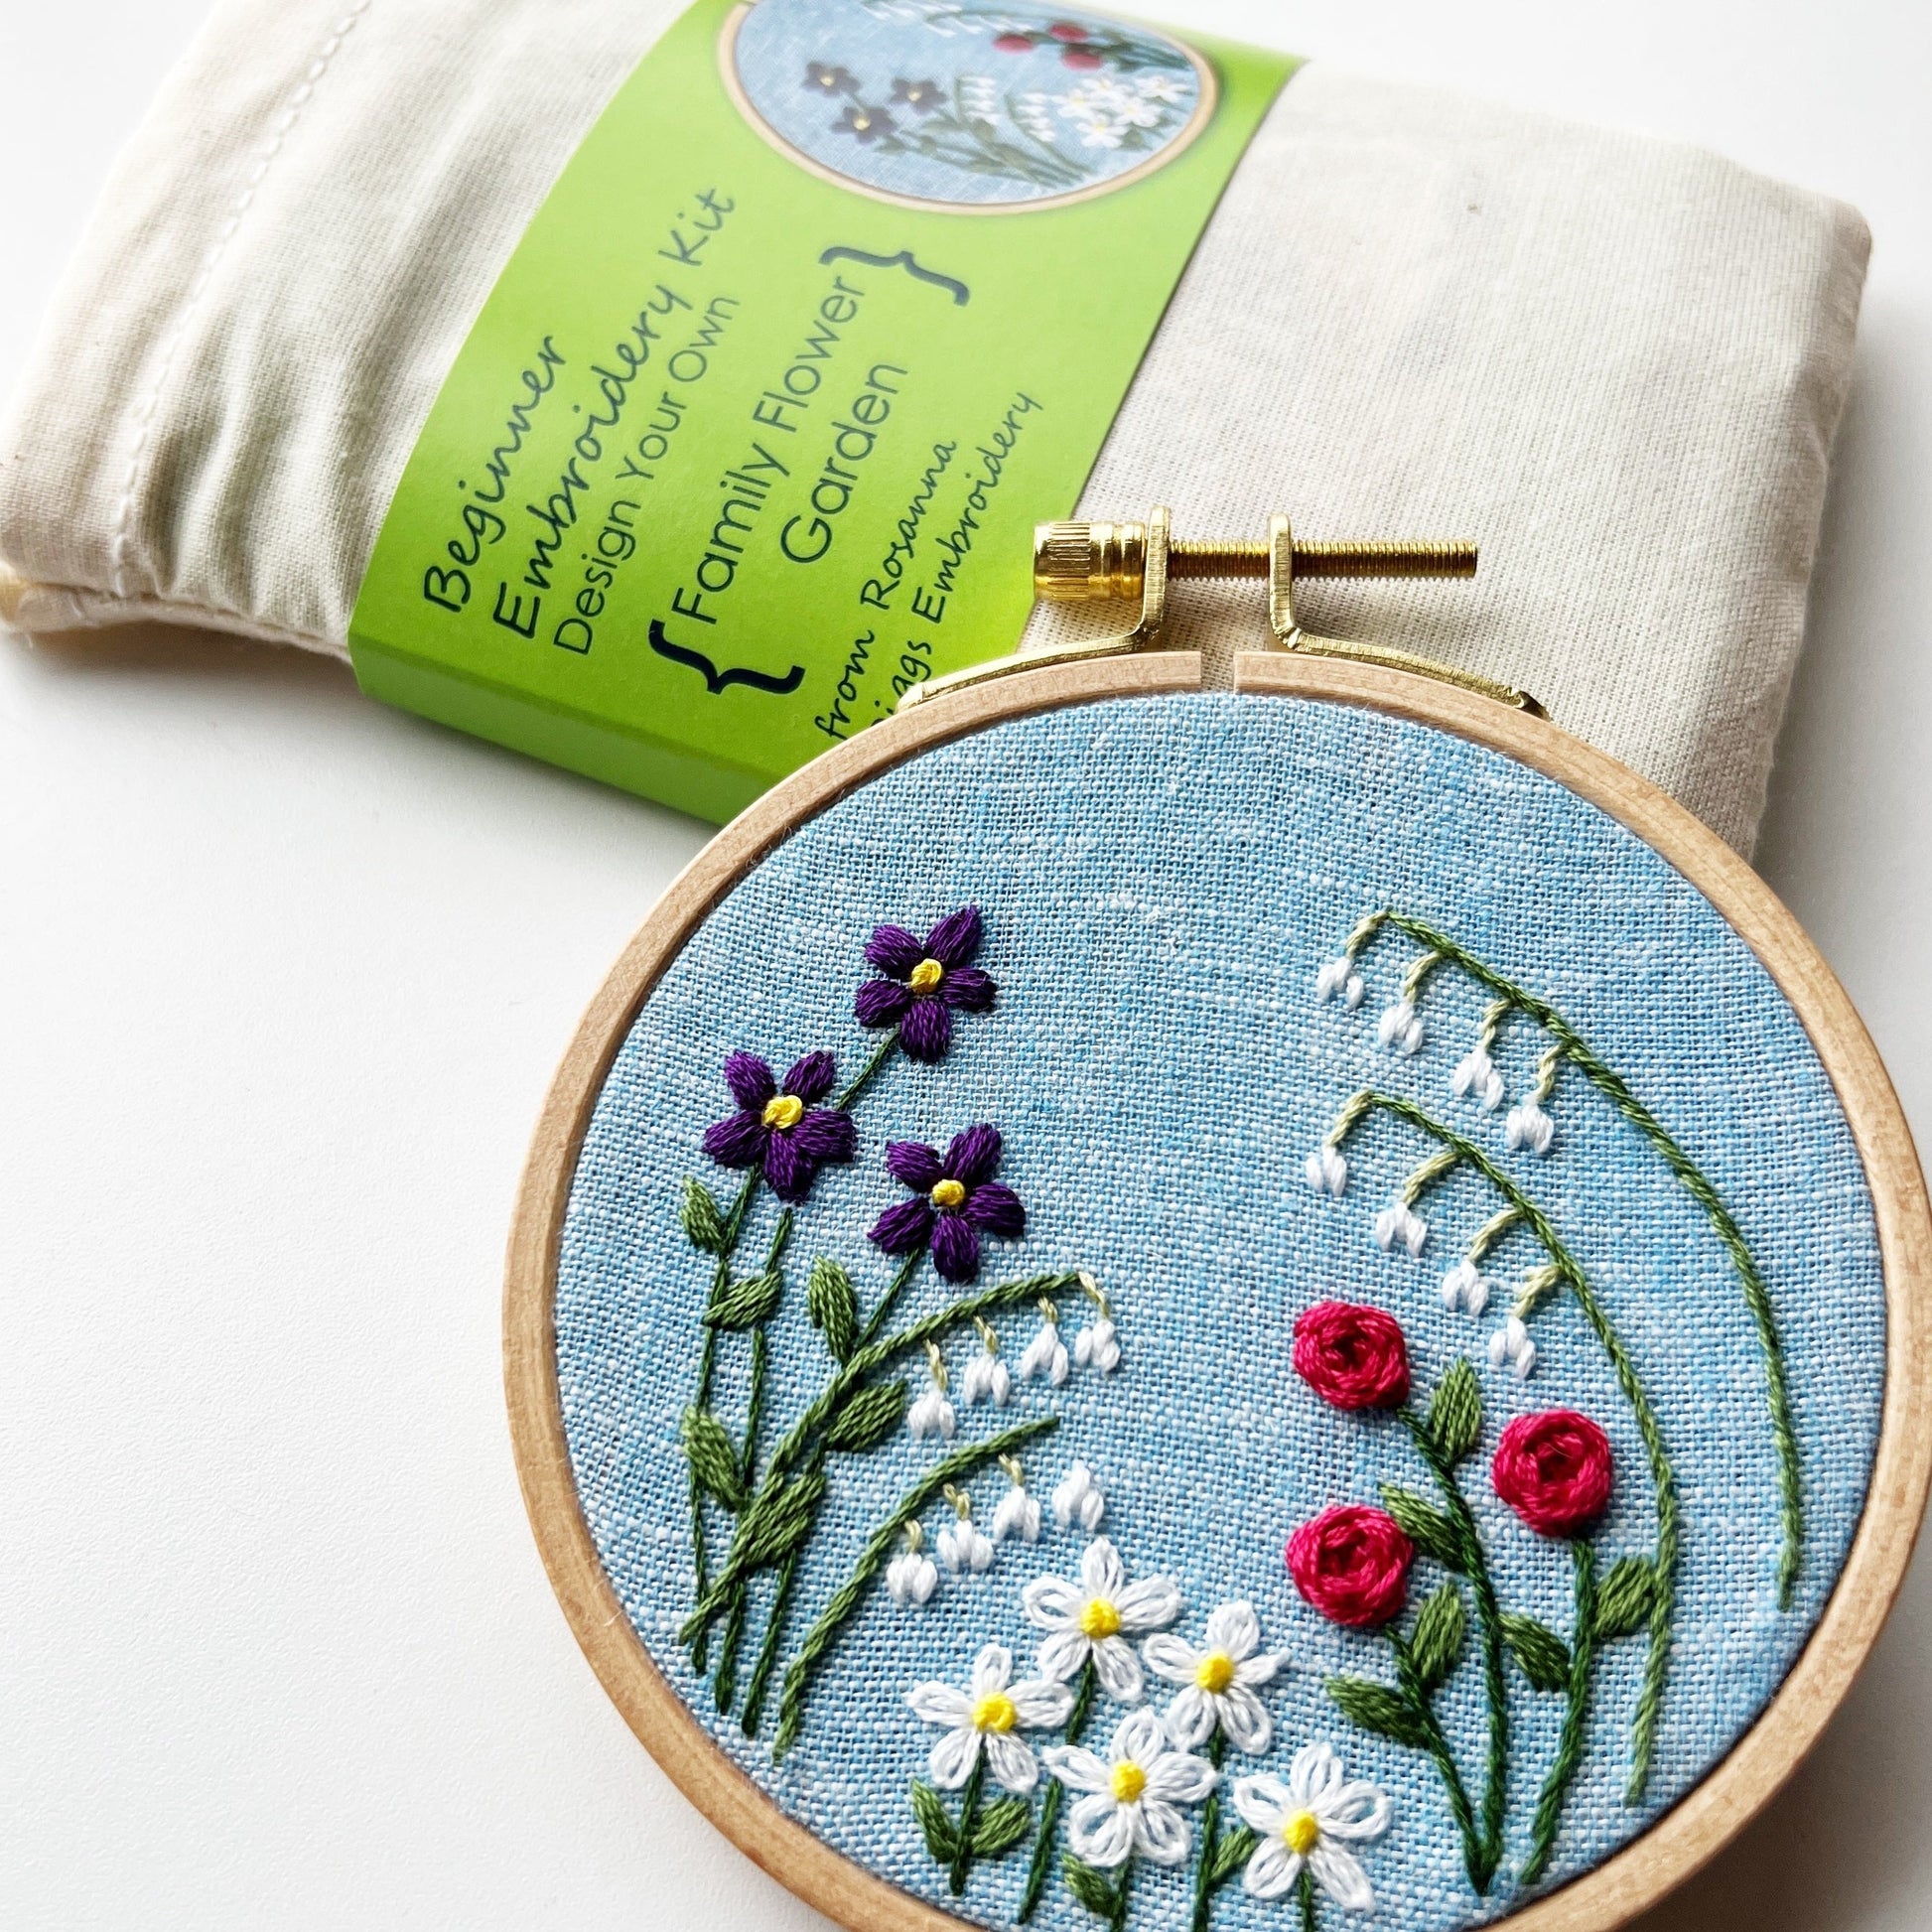 finished embroidery hoop propped against embroidery kit